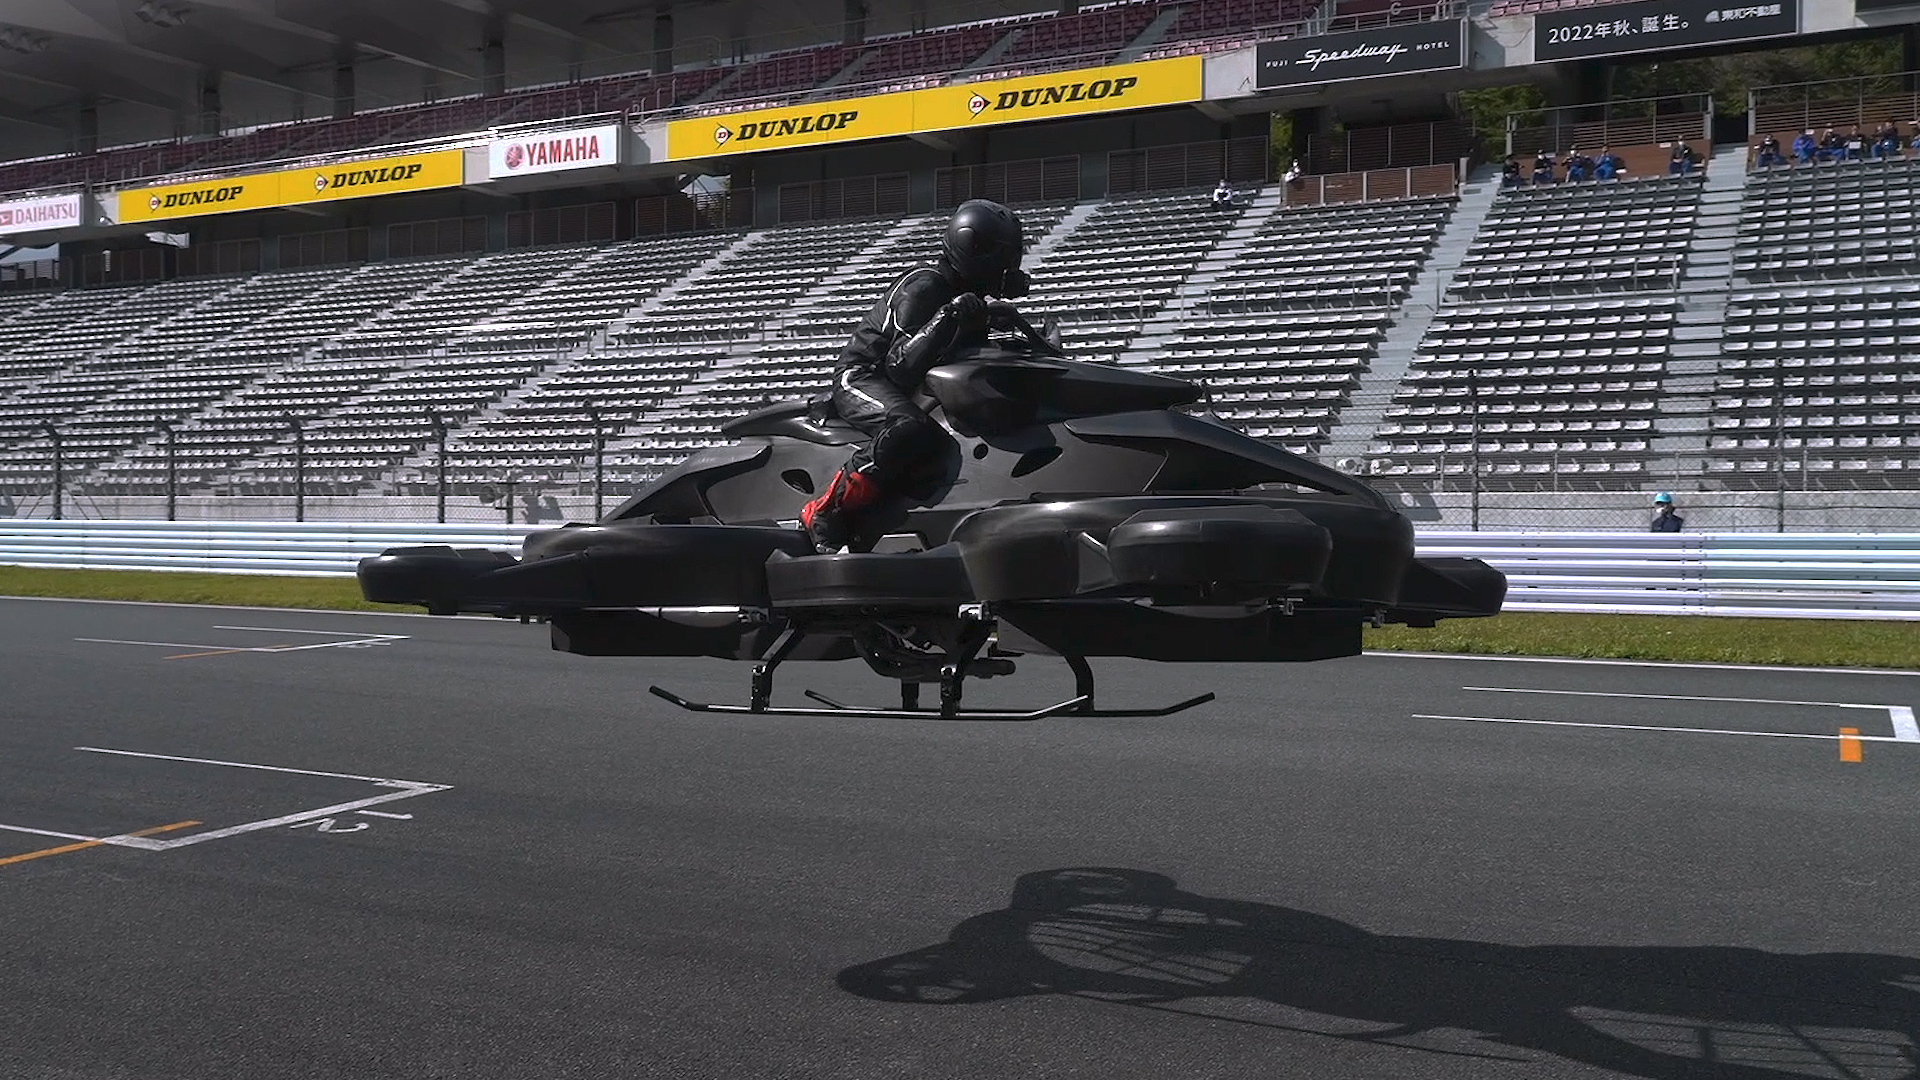 Watch "XTURISMO Limited Edition" hoverbike take flight - CNN Video